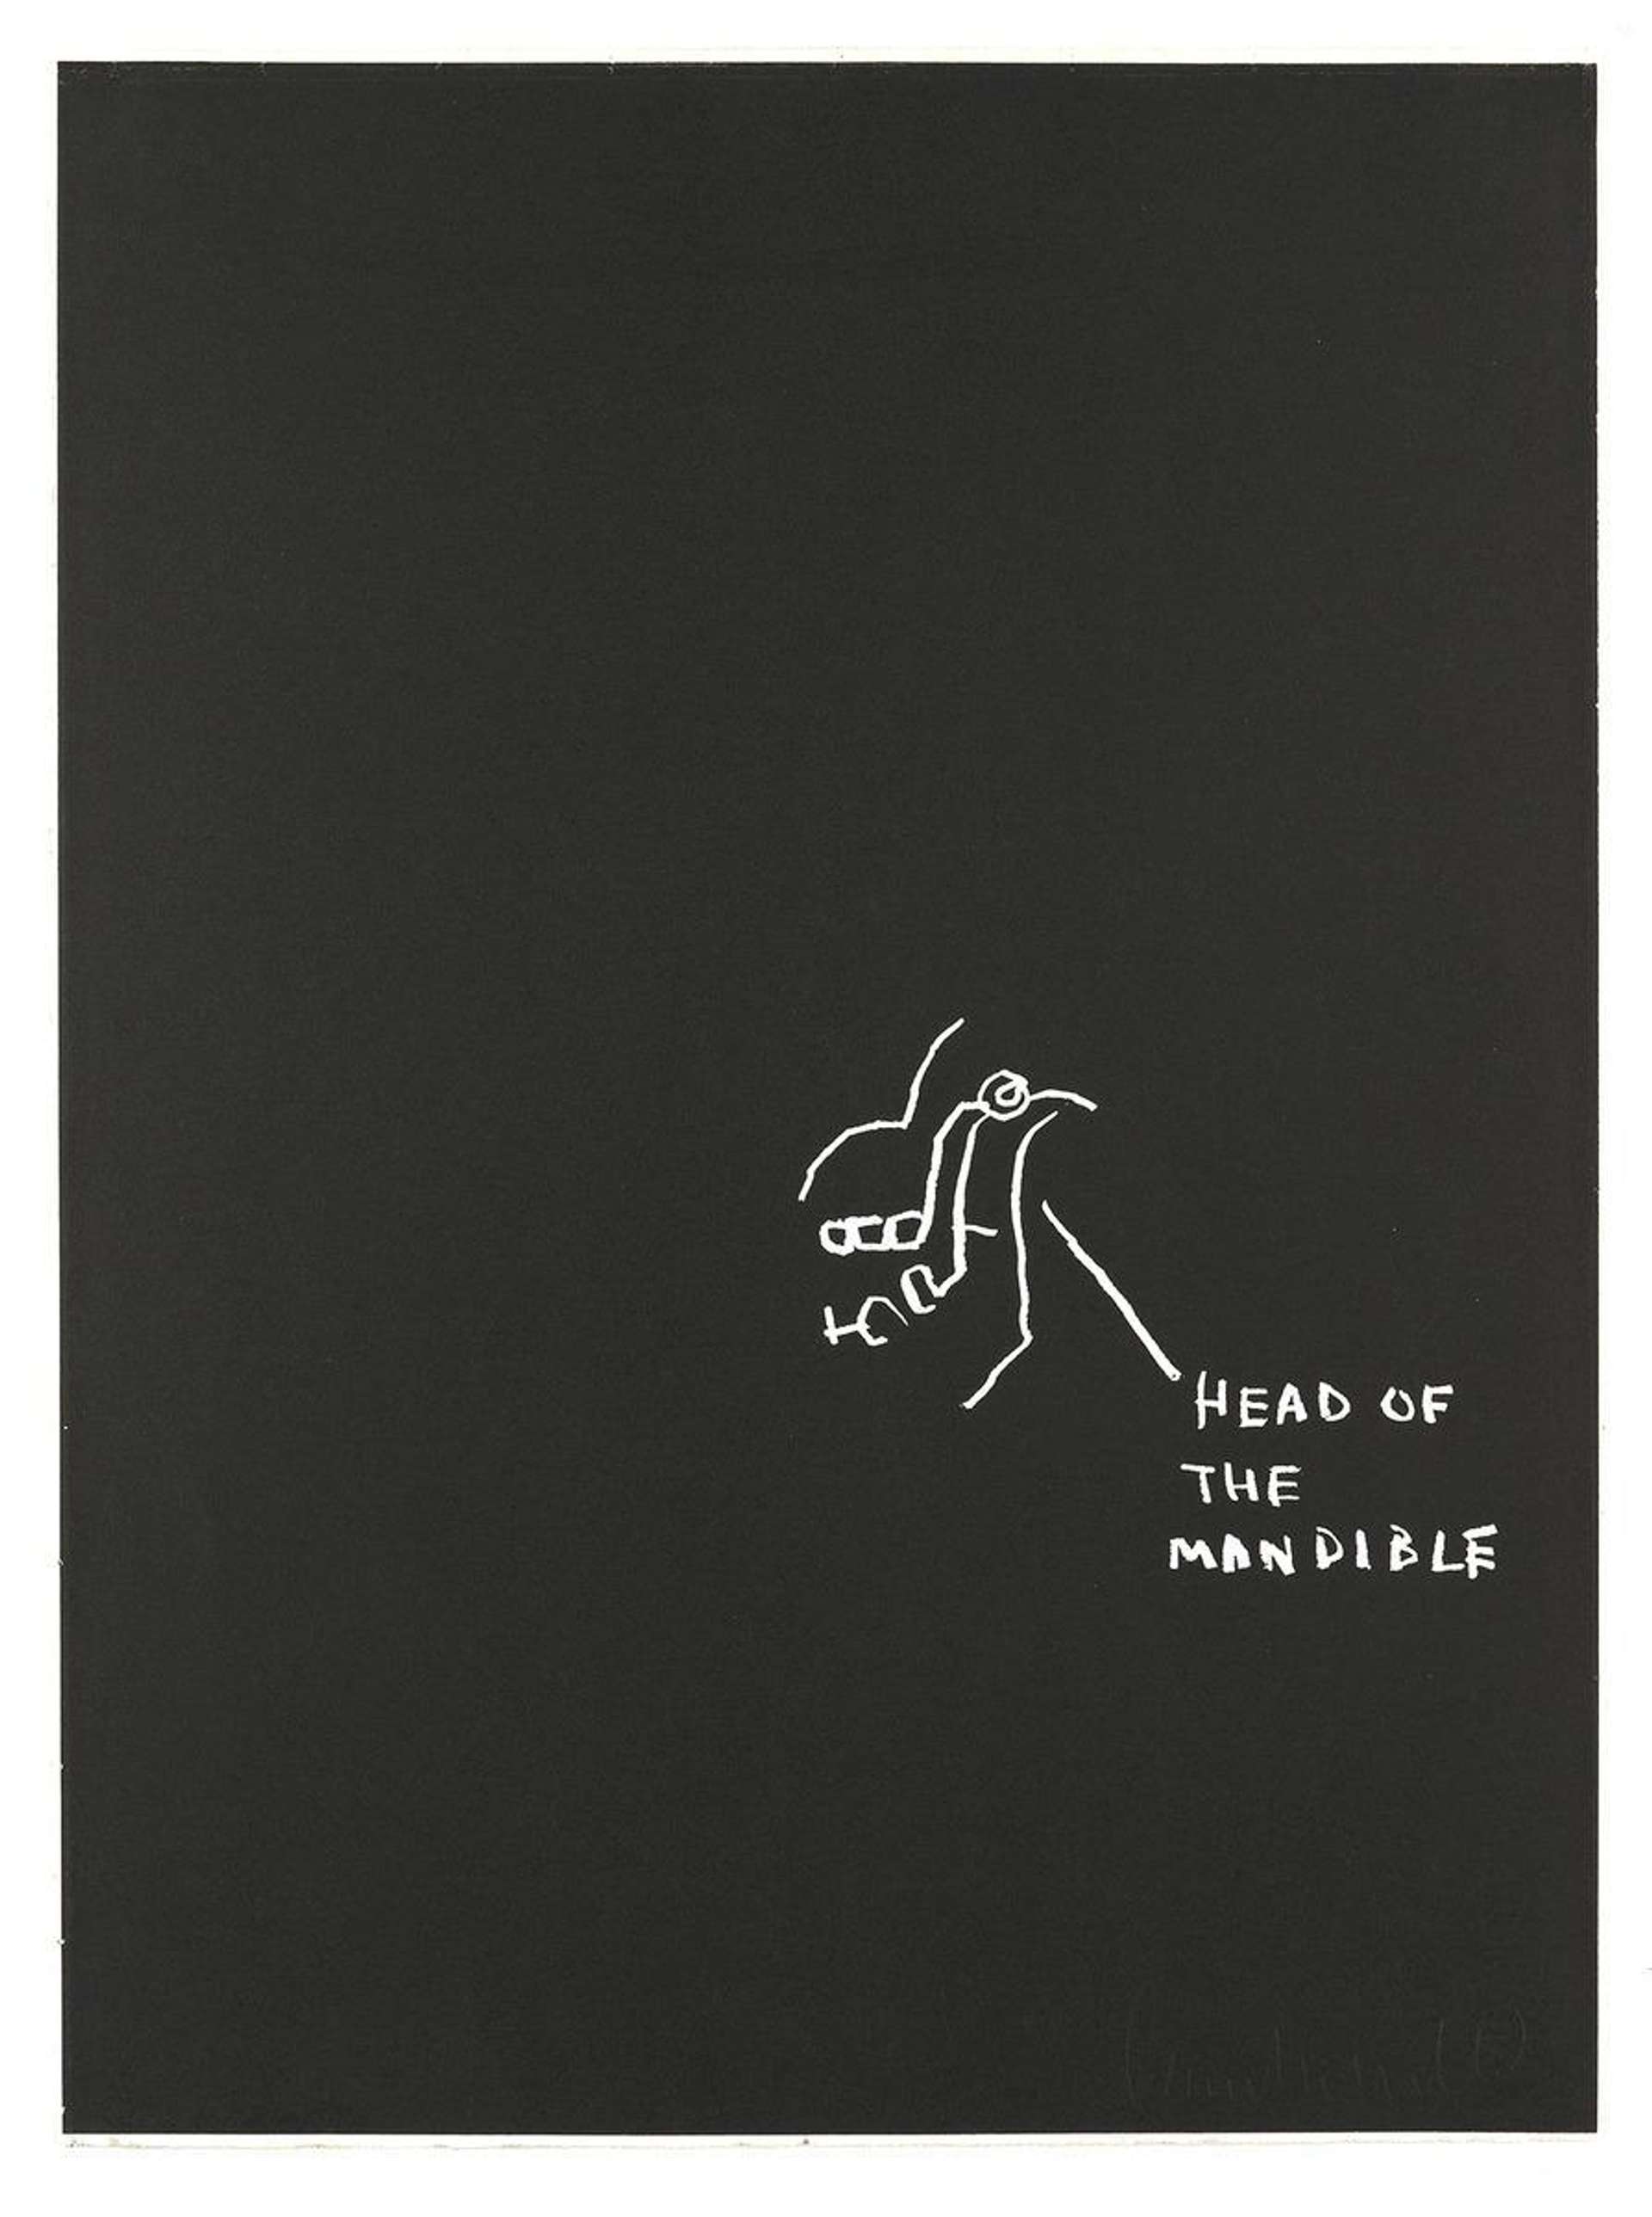 Jean-Michel Basquiat’s Anatomy, Head Of The Mandible. A black screenprint featuring white anatomical drawings of the side profile of an animal jaw bone with descriptive labels.